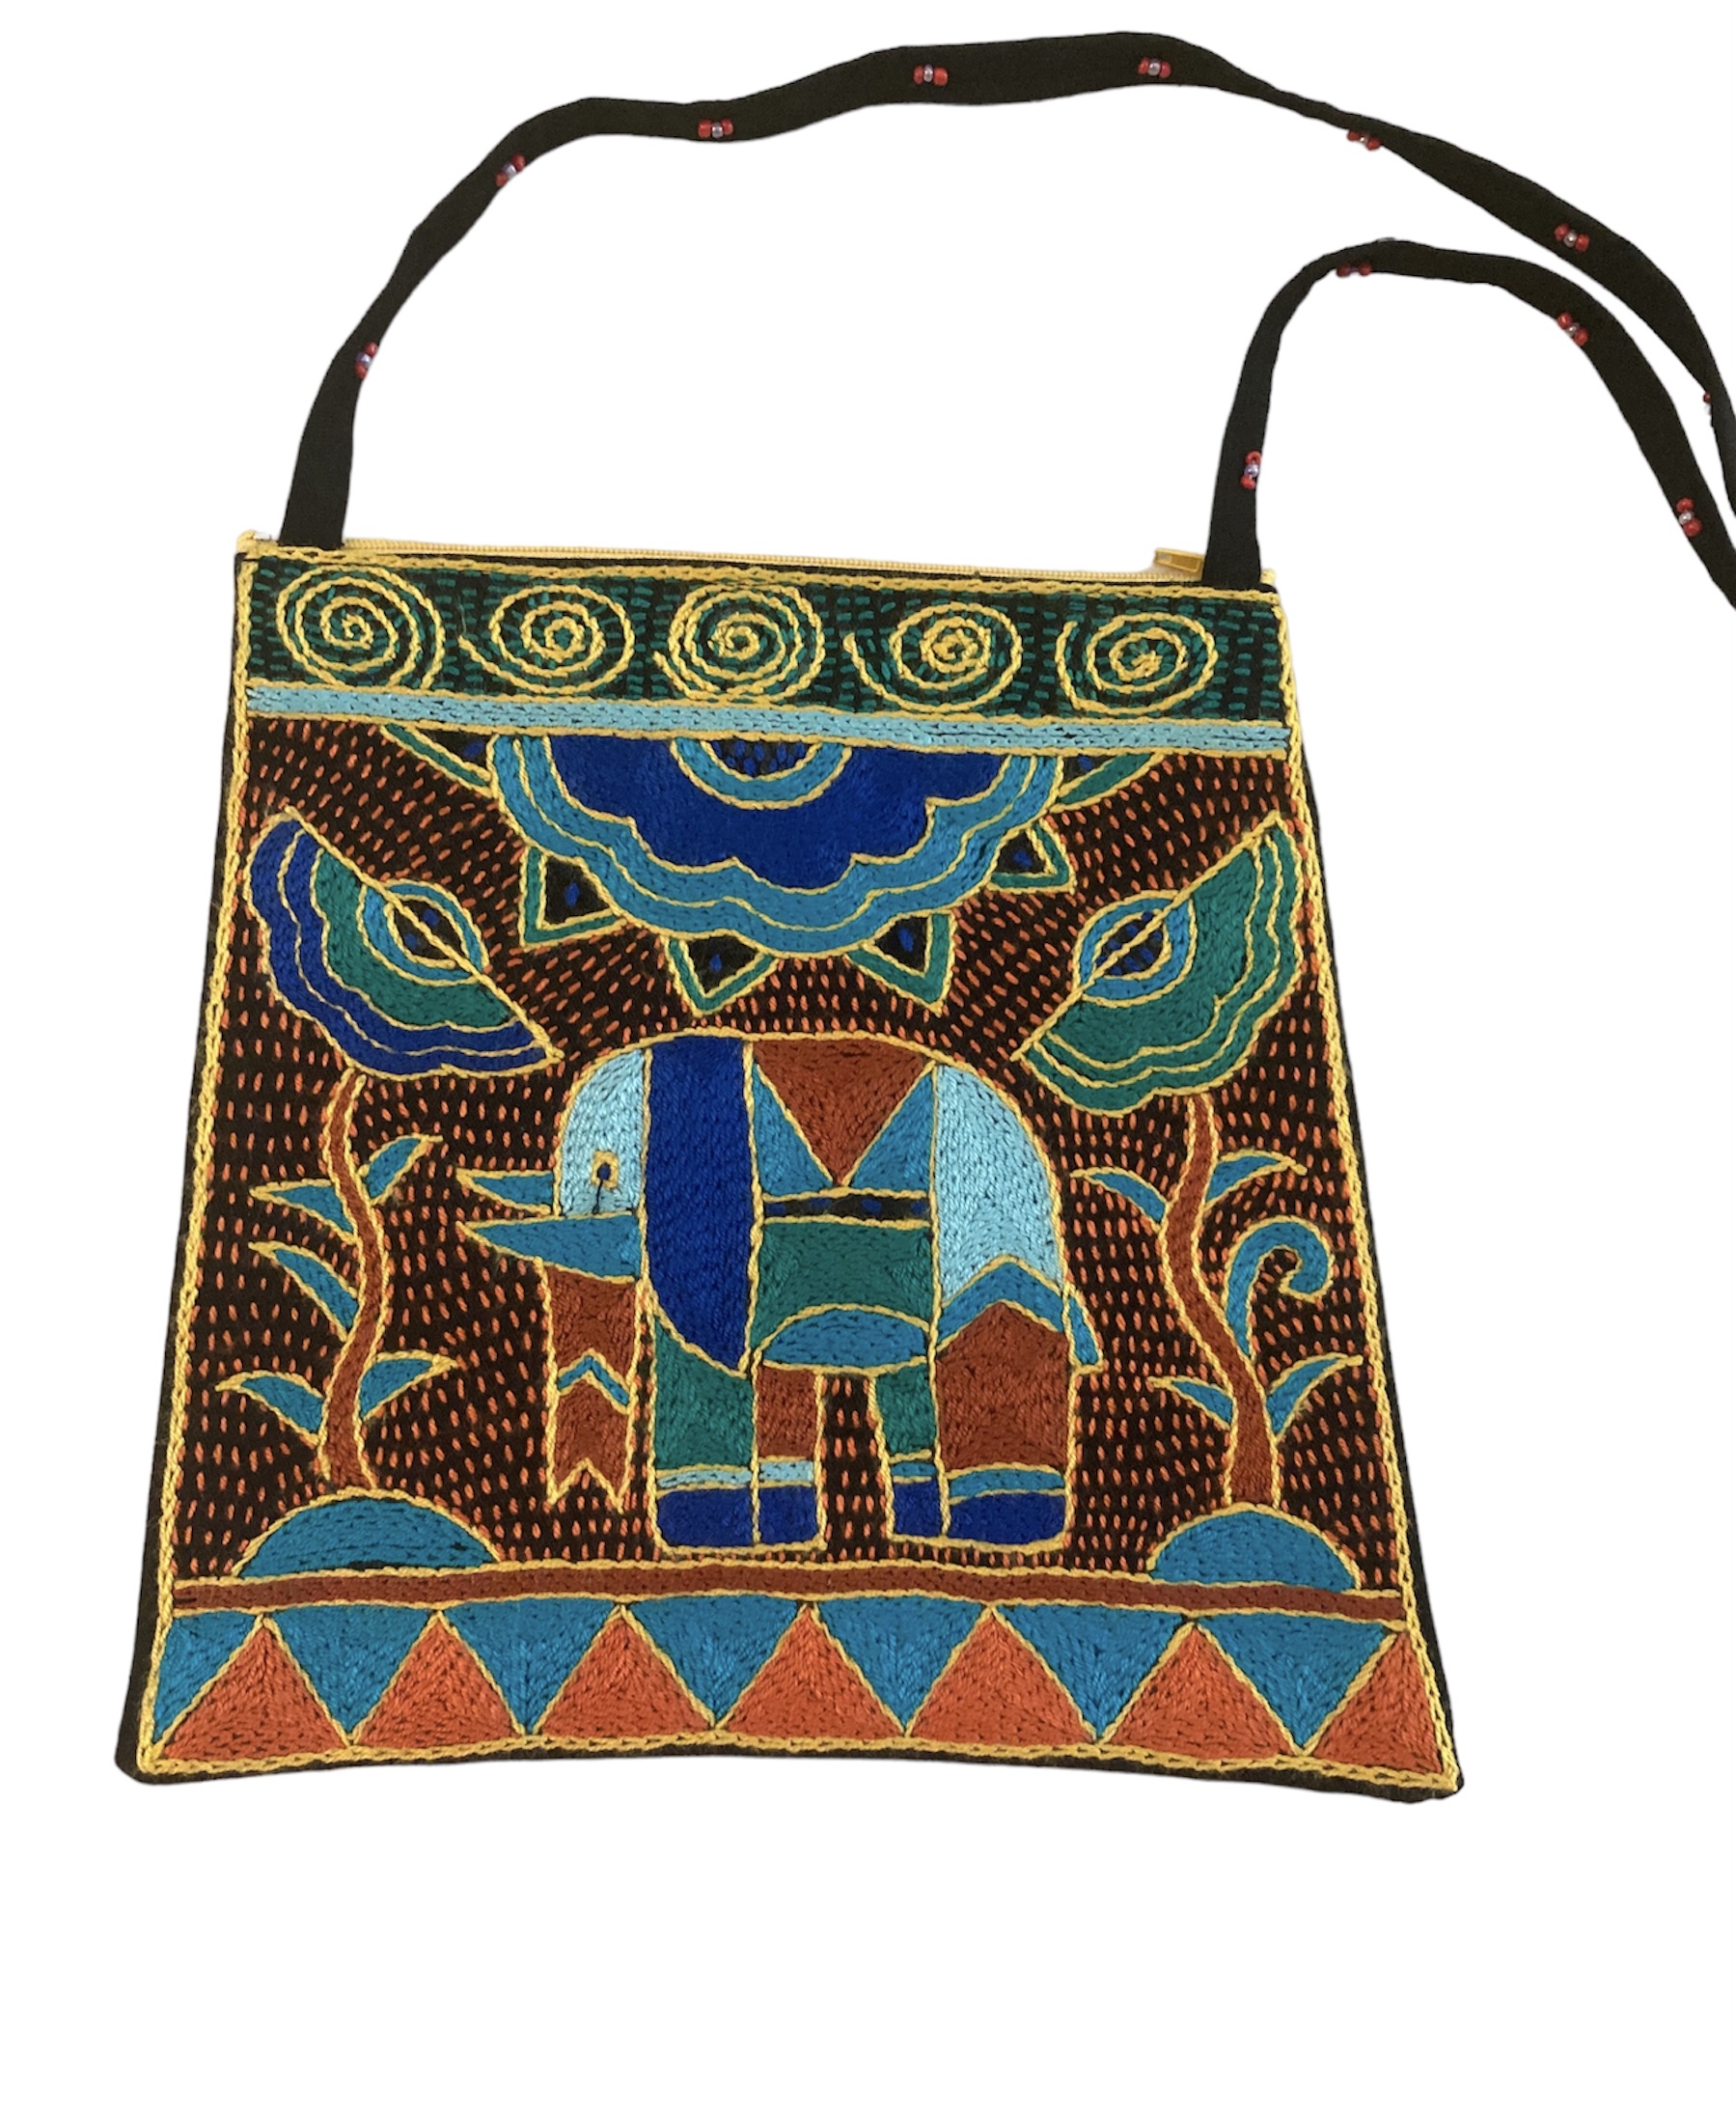 100% Hand-Embroidered Shangaan Purse #201910